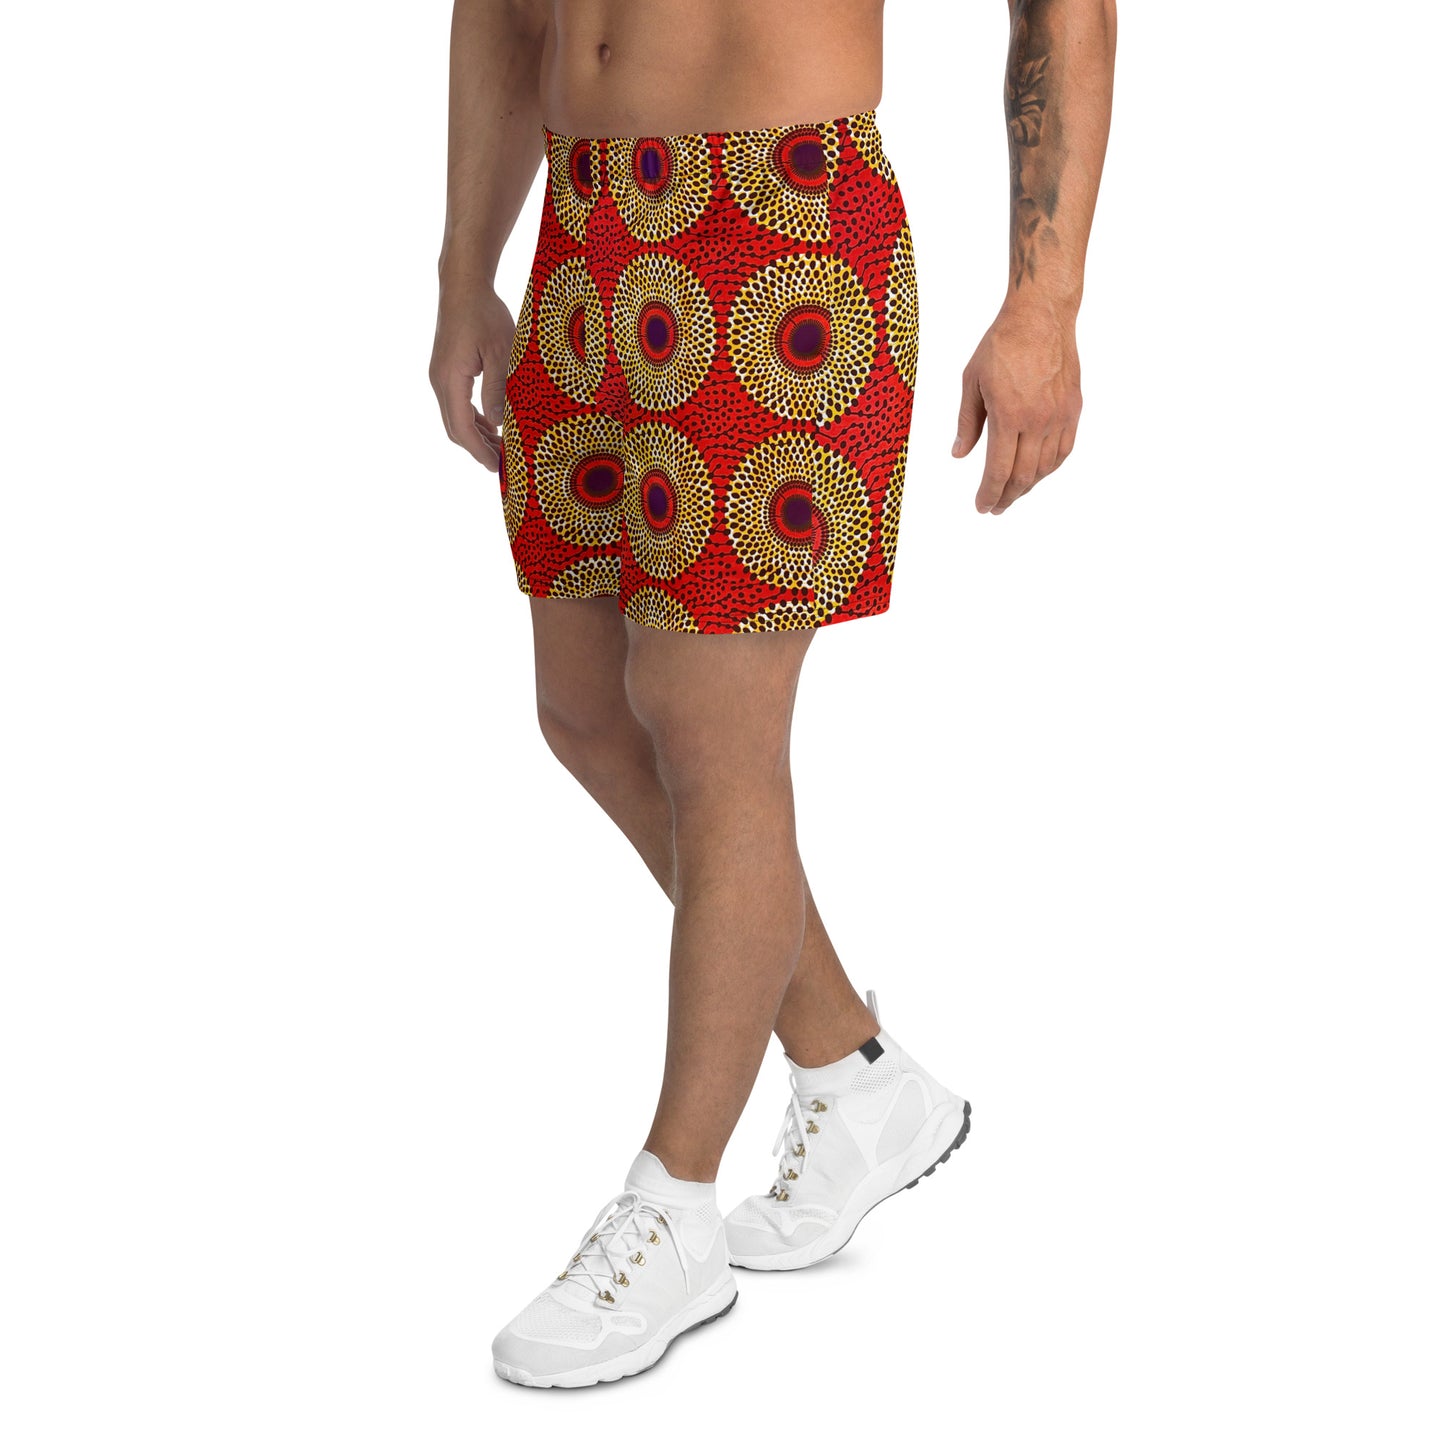 Rekiana African Print Men's Recycled Athletic Shorts